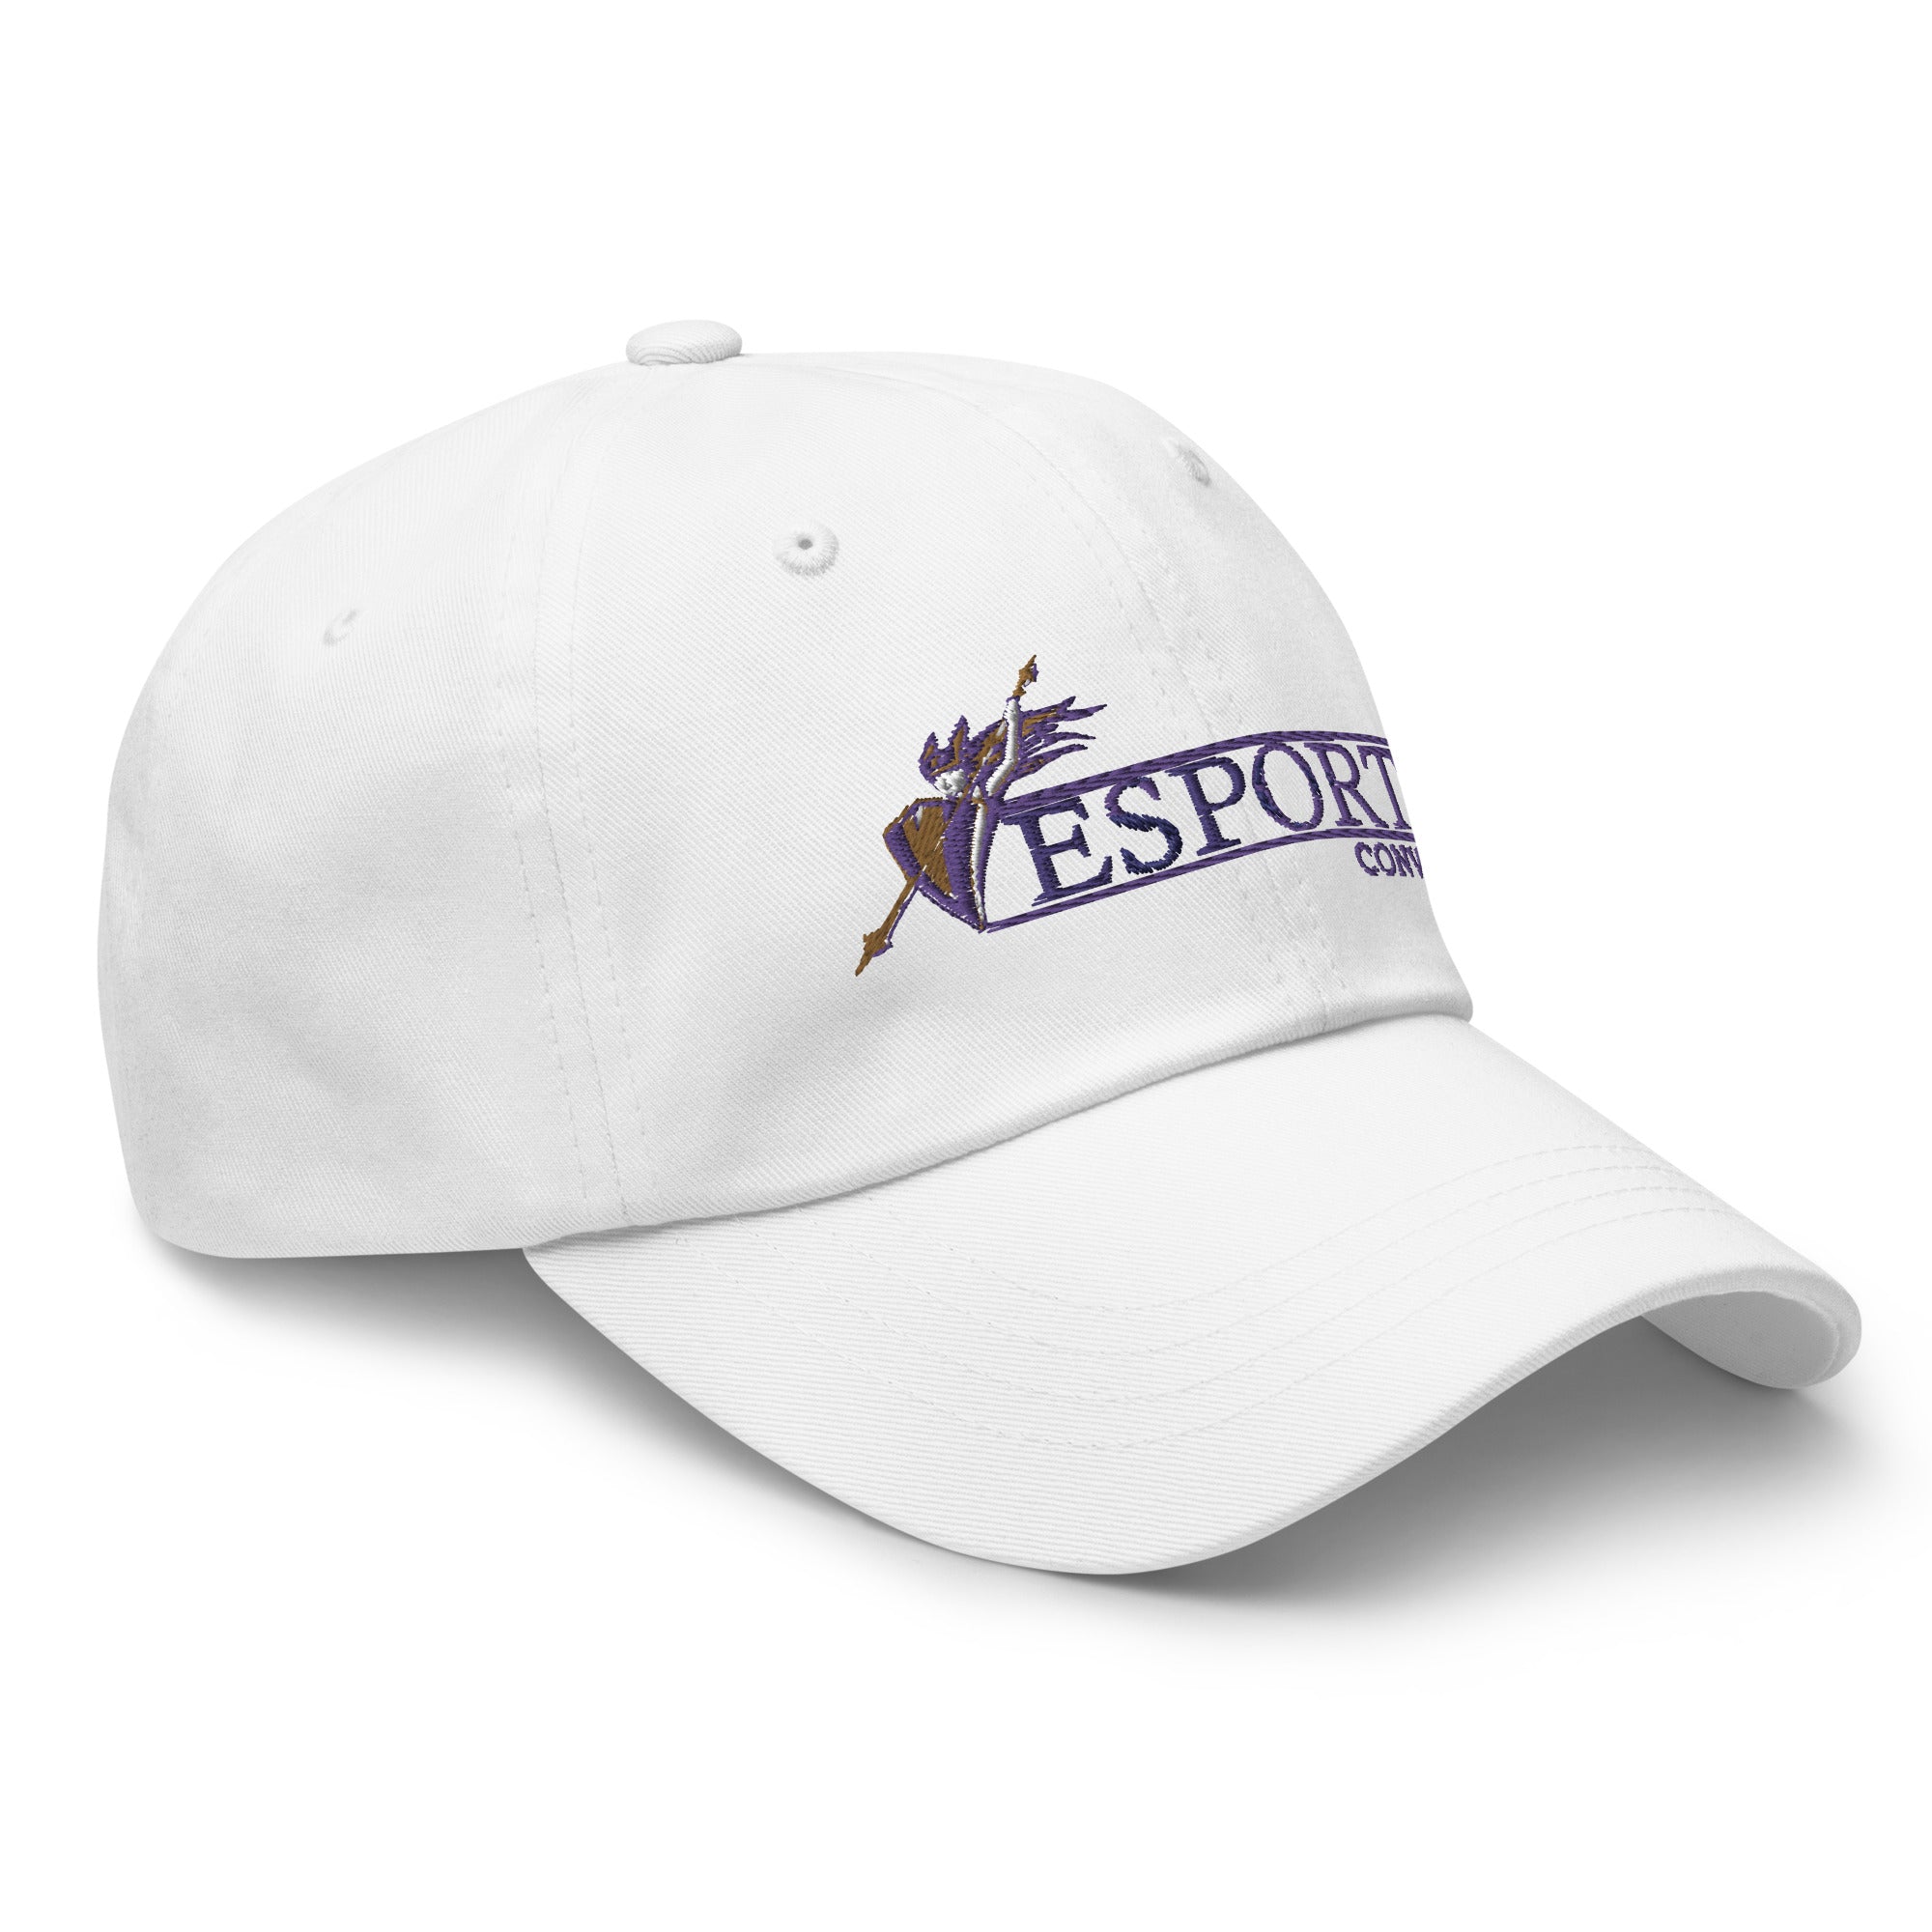 Converse University | On Demand | Embroidered Dad Hat